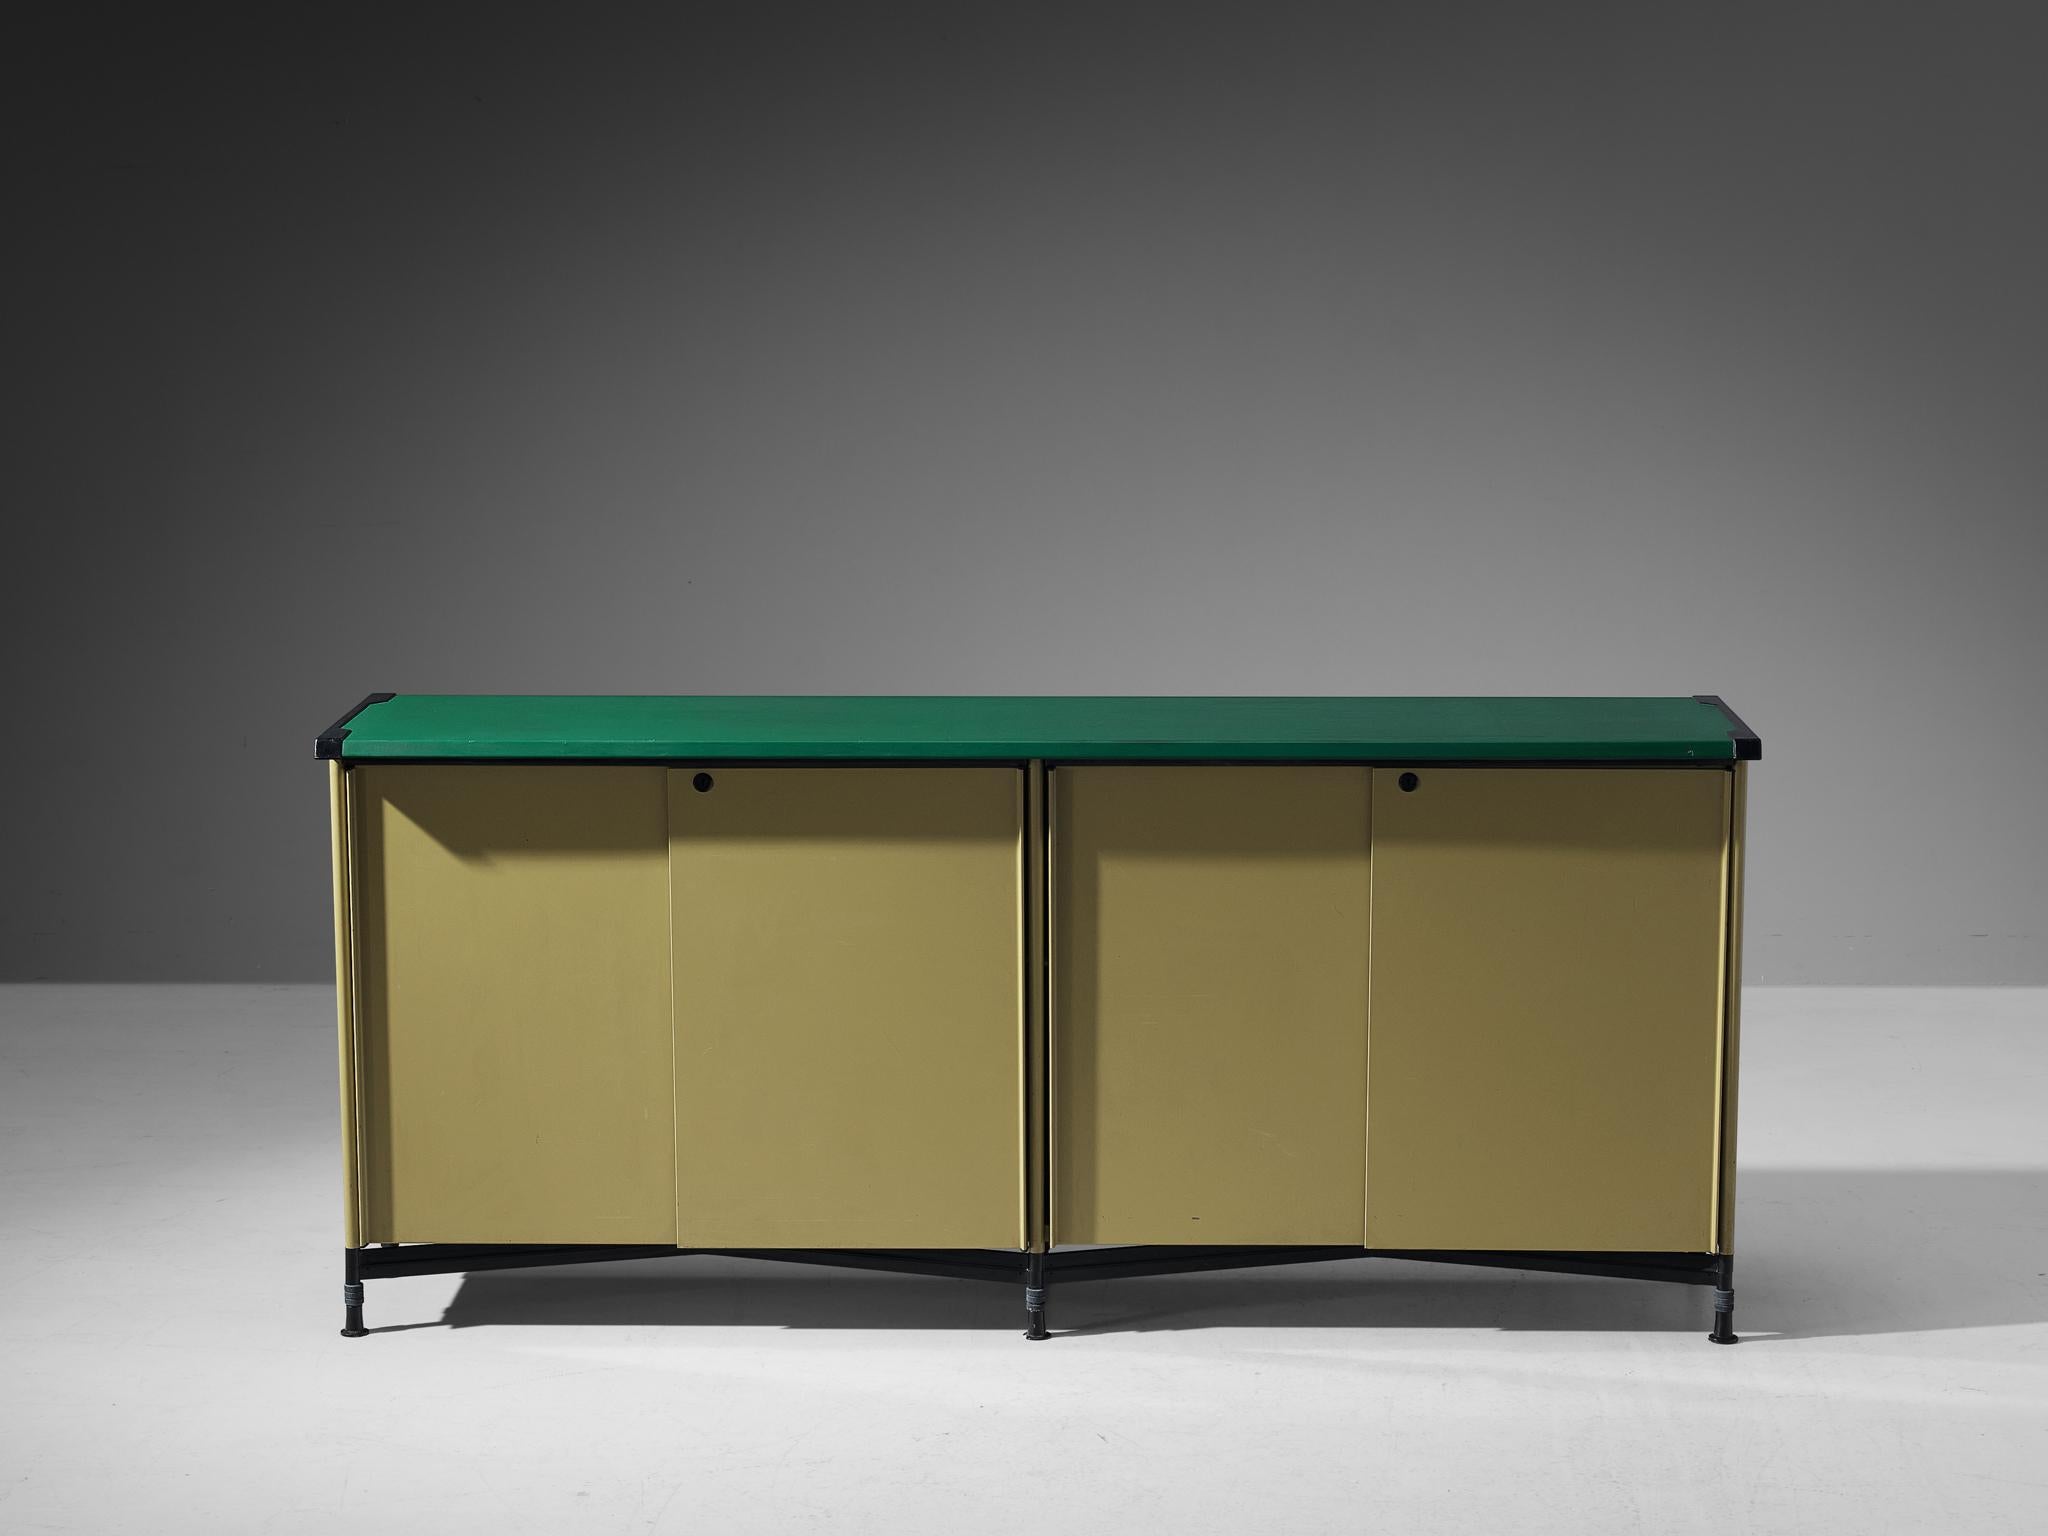 Studio BBPR for Olivetti, 'Spazio' sideboard, steel, vinyl, plastic, Italy, ca. 1960 

This free-standing ‘Spazio’ sideboard features two sliding doors with a lock. Due to the sloping edges of the top, a green line accentuates the front and back.